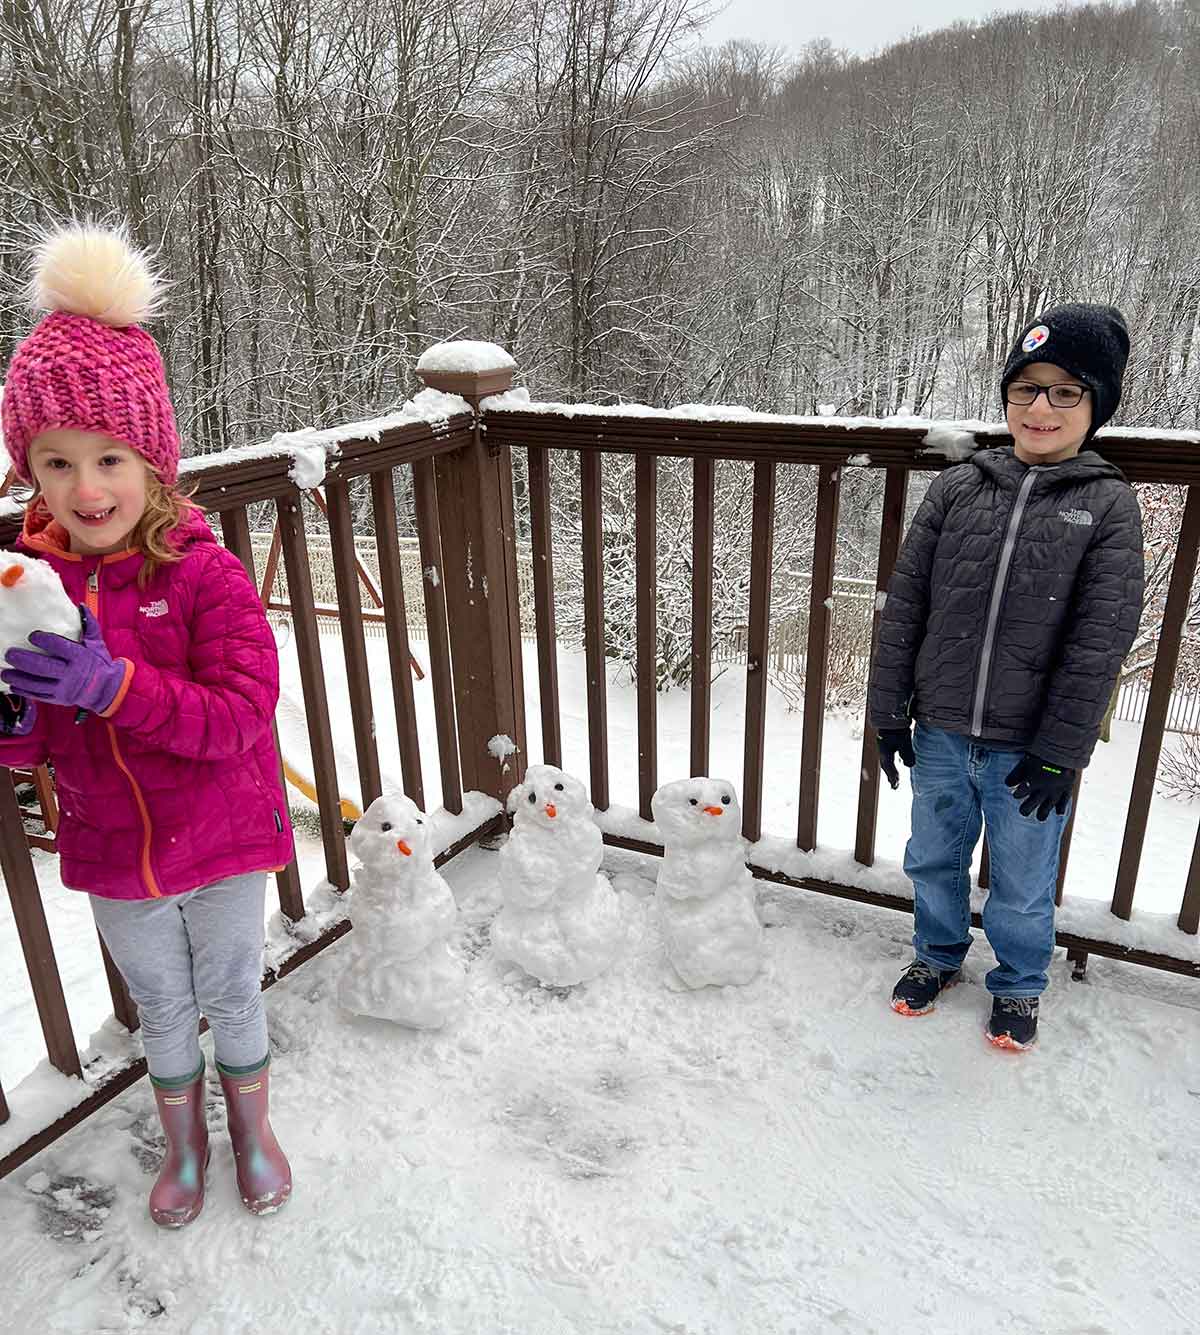 A girl and boy standing on a snowy deck with three small snowmen between them.